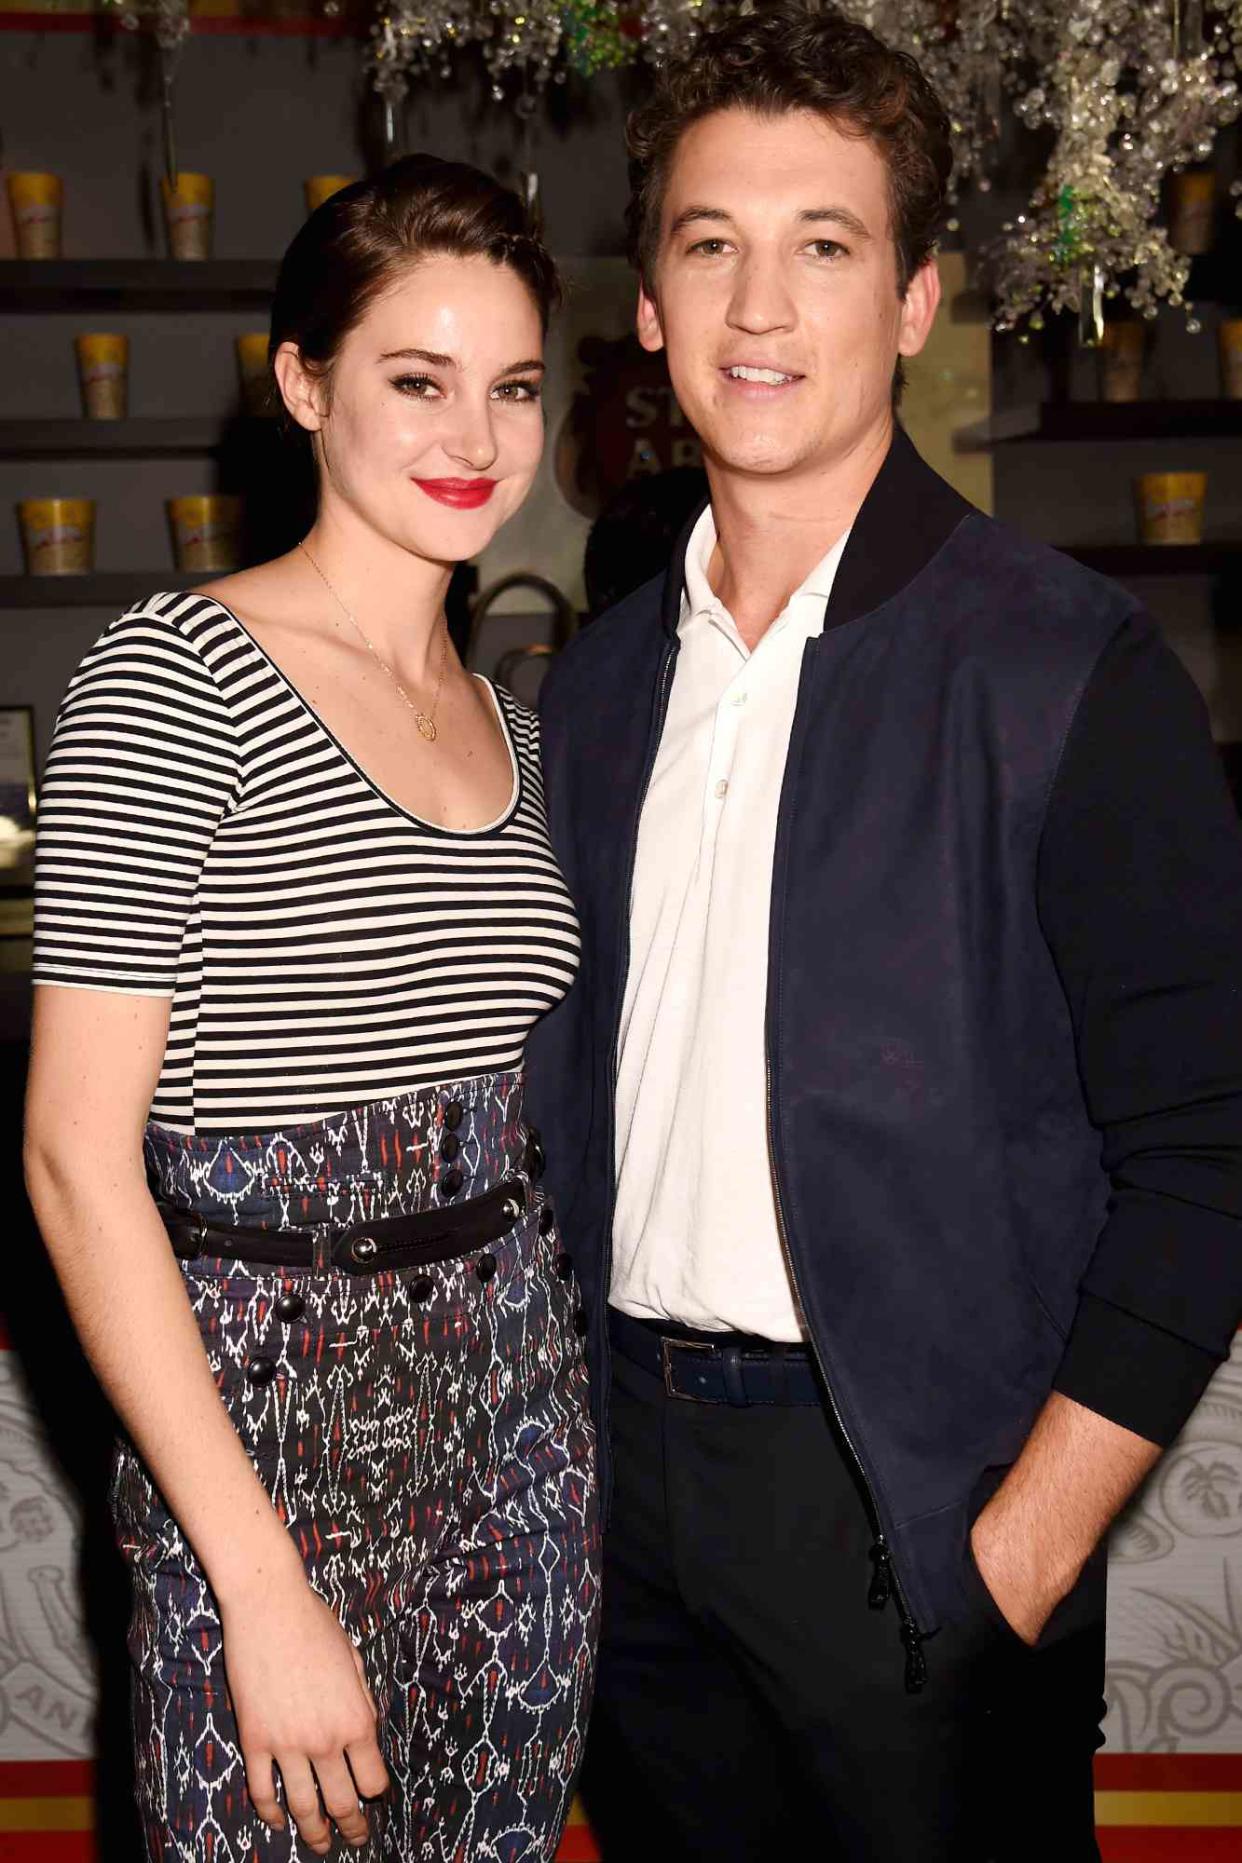 Shailene Woodley (L) and Miles Teller attend The 2015 MTV Movie Awards at Nokia Theatre L.A. Live on April 12, 2015 in Los Angeles, California.